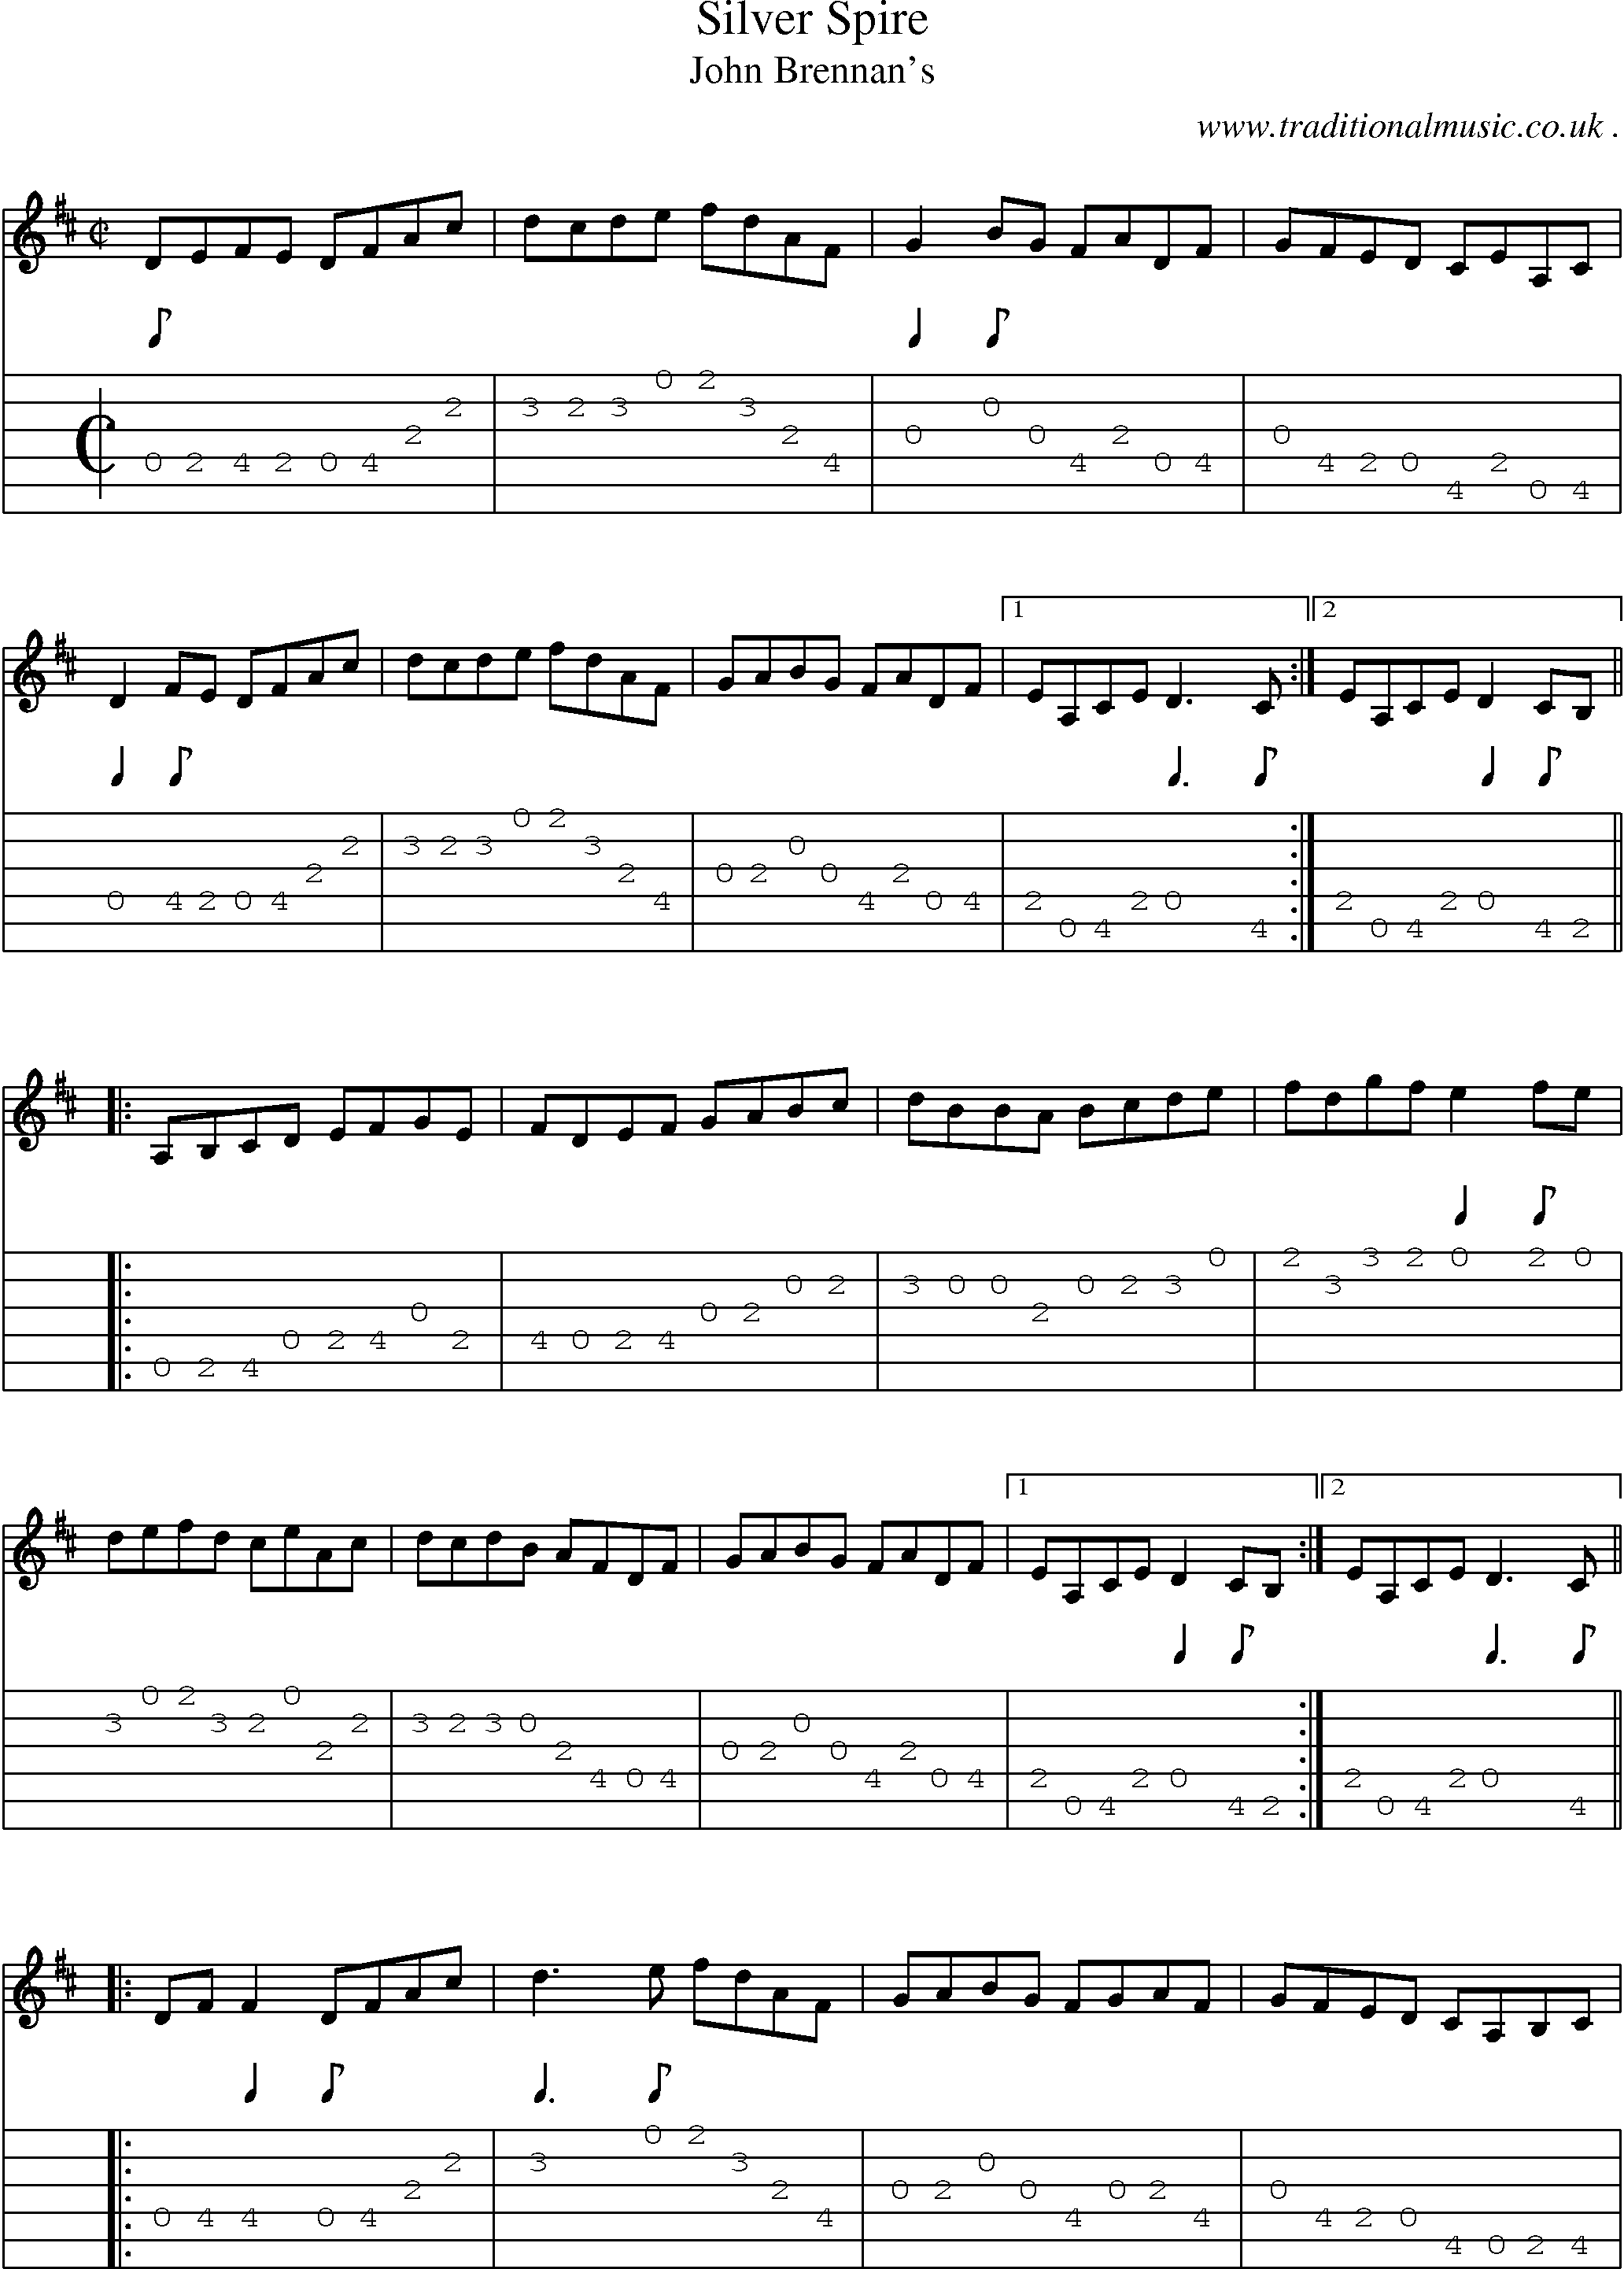 Sheet-Music and Guitar Tabs for Silver Spire